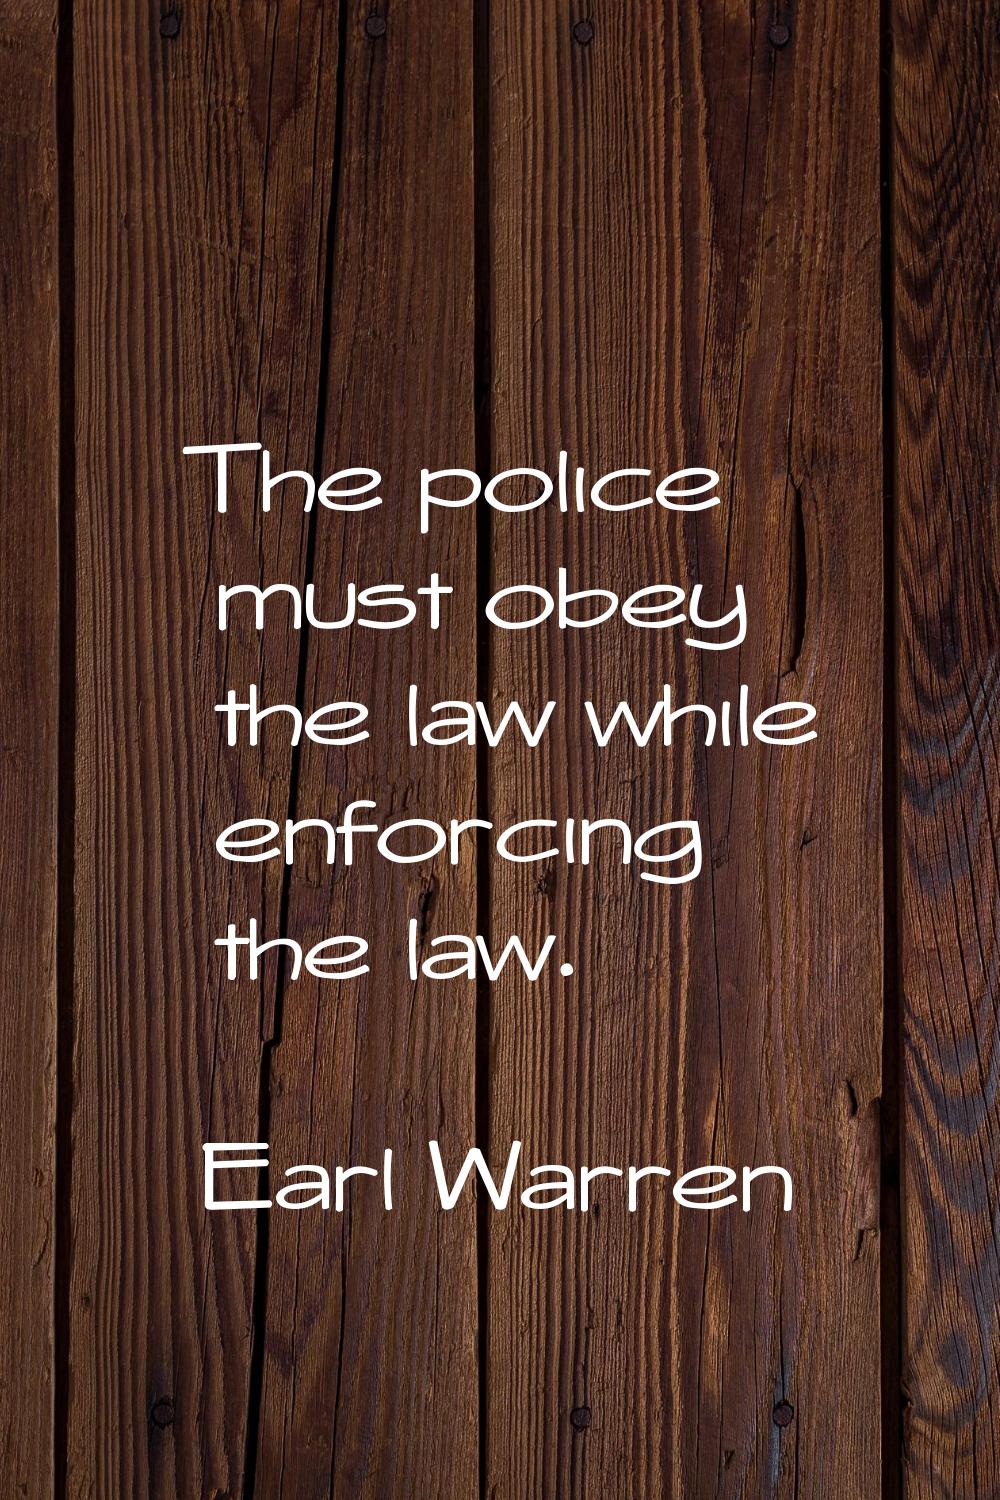 The police must obey the law while enforcing the law.